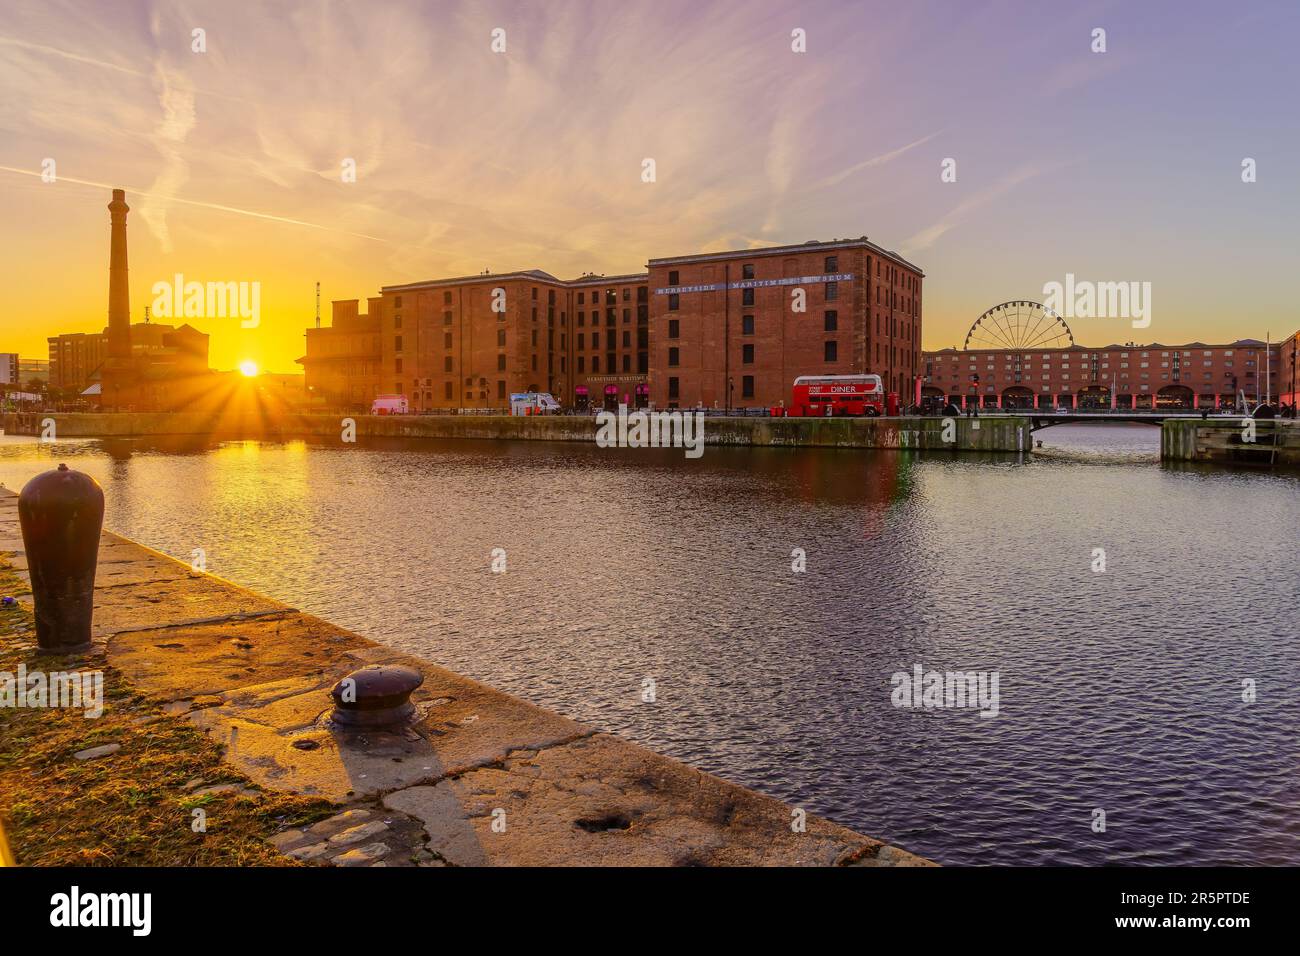 Liverpool, UK - October 09, 2022: Sunrise view of the Royal Albert Dock, with various buildings, in Liverpool, Merseyside, England, UK Stock Photo